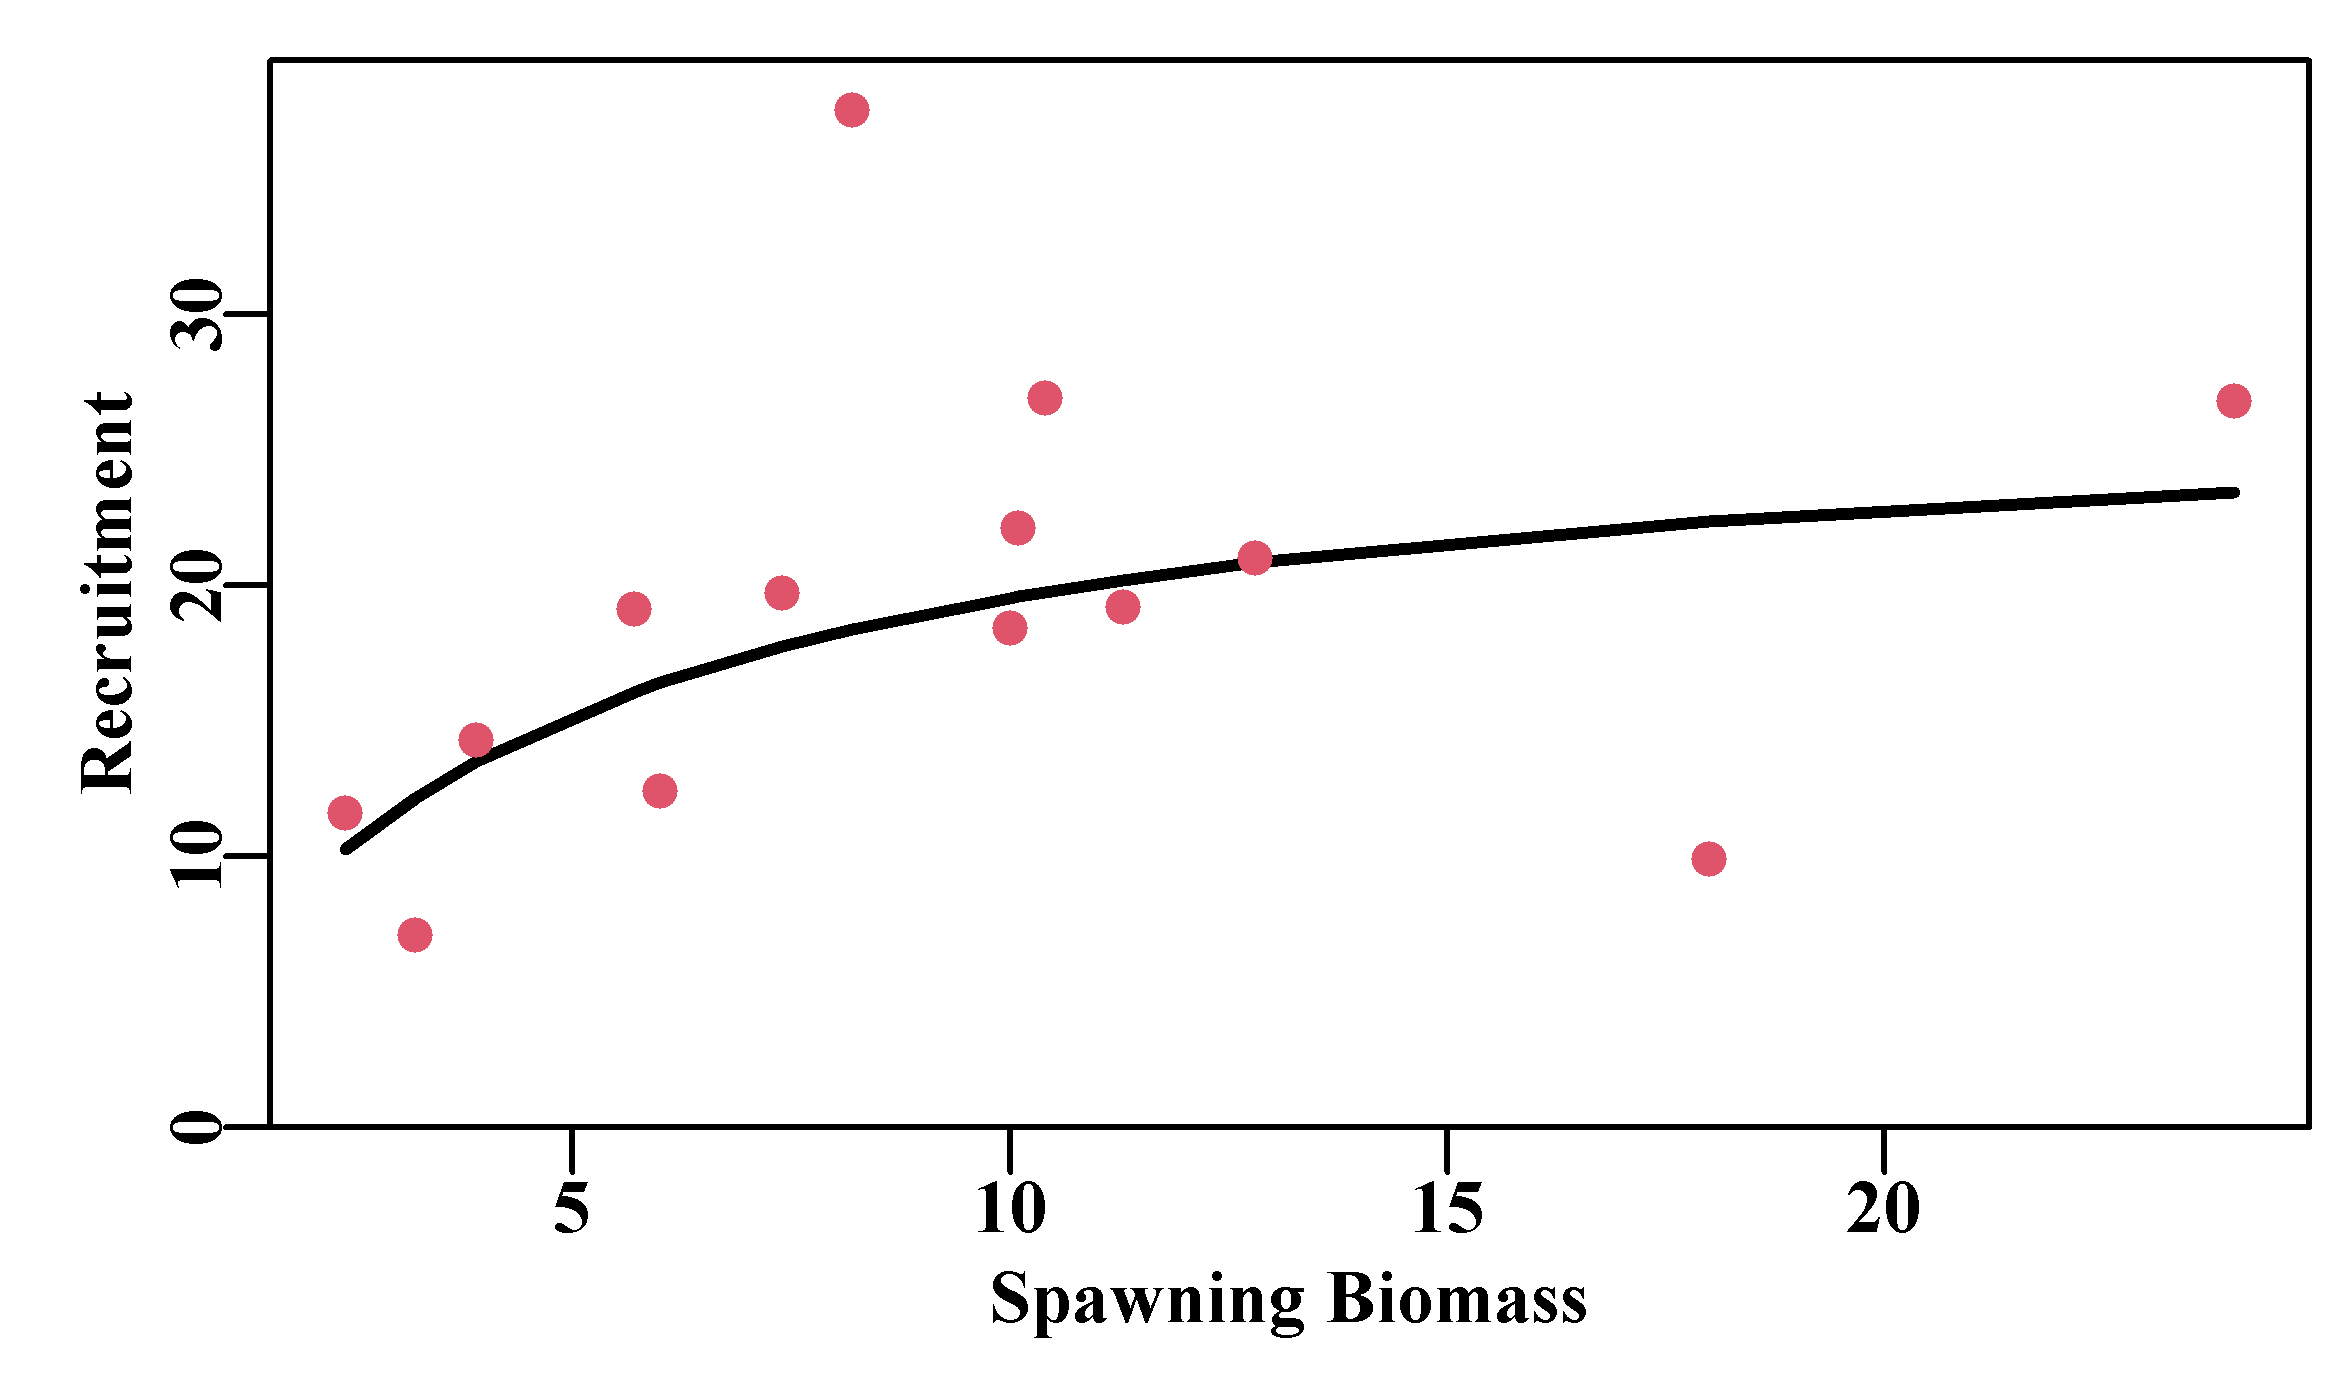 The optimum fit to the Exmouth Gulf tiger prawns Beverton-Holt stock recruitment relationship using log-normal likelihoods.